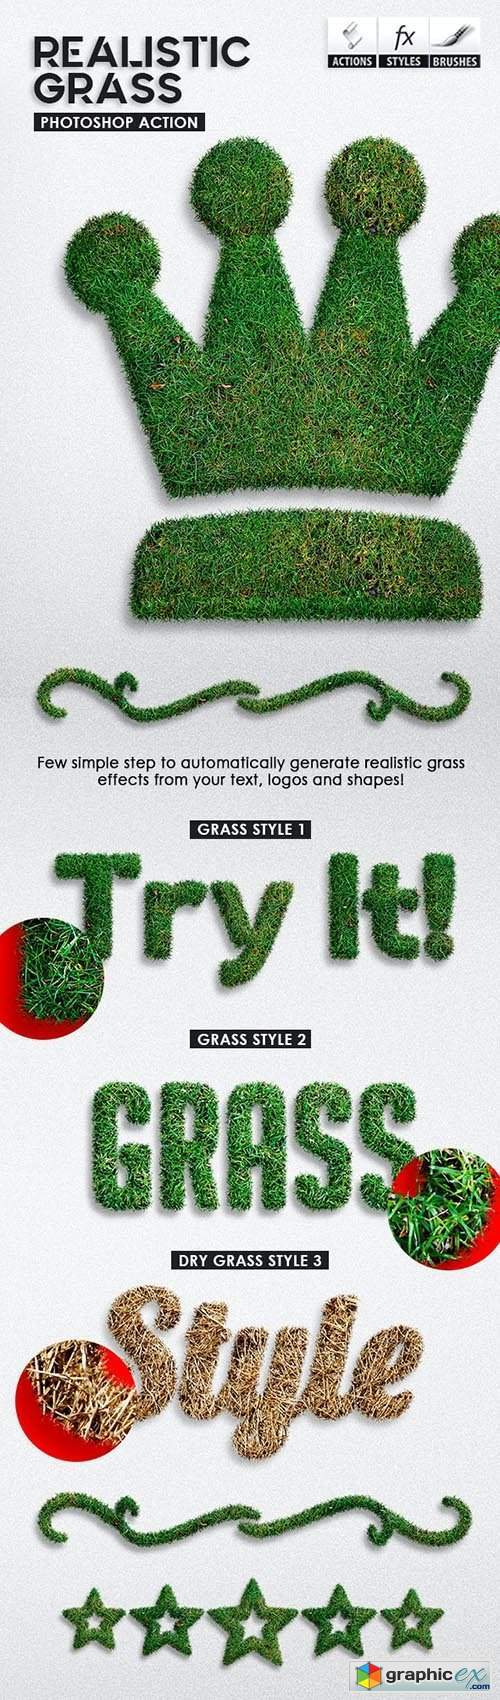 Realistic Grass - Photoshop Actions